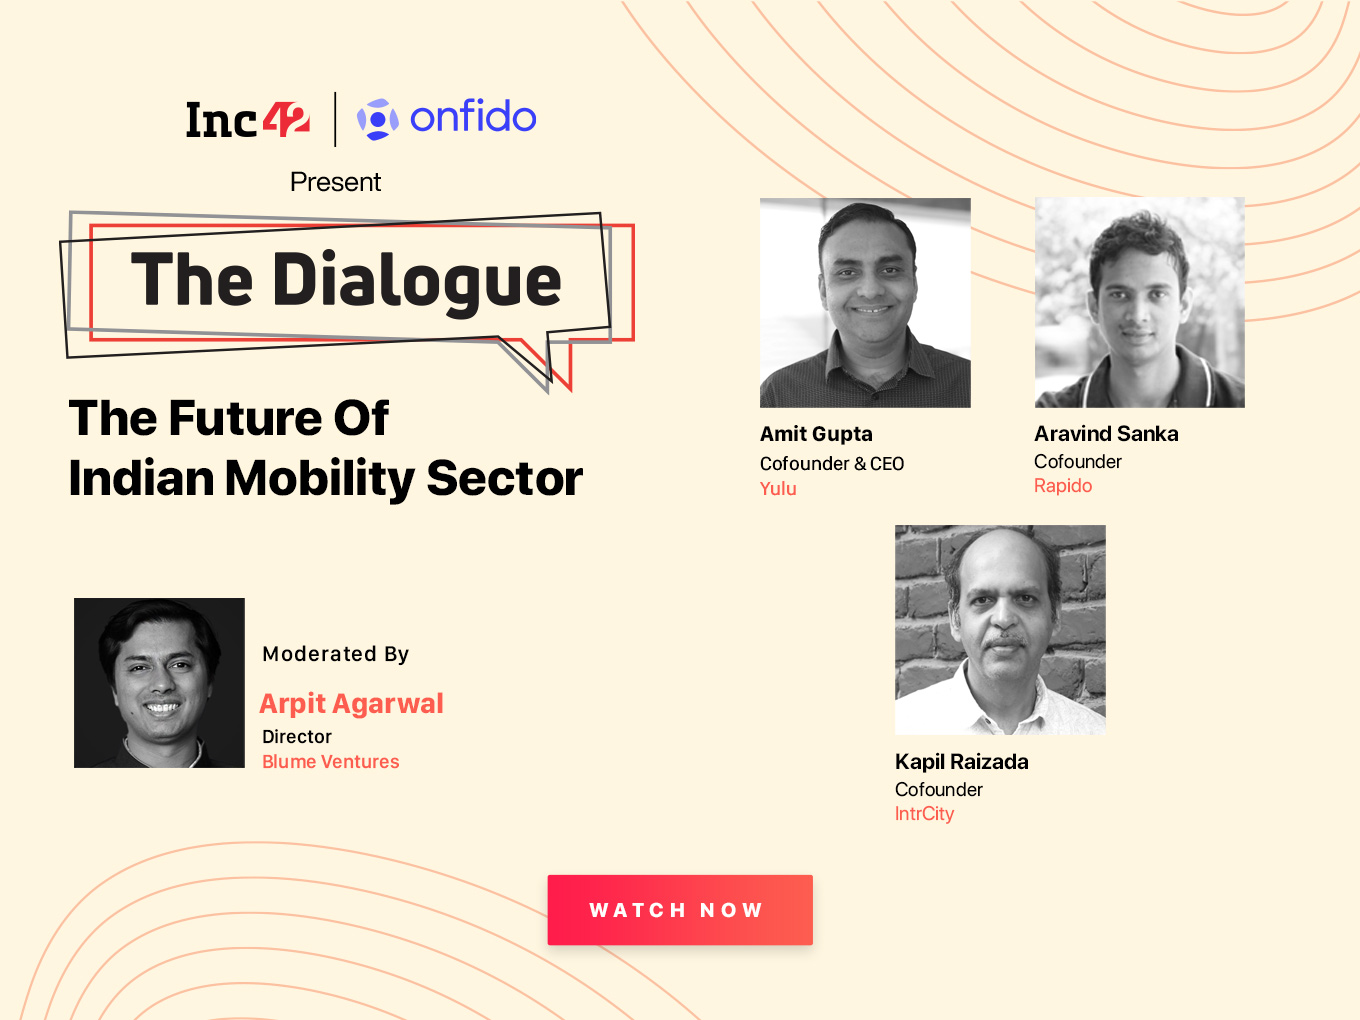 How Mobility Startups Like Yulu, Rapido And IntrCity Are Revving Up To Tap Into The $165 Bn Market Volume Projected By 2025